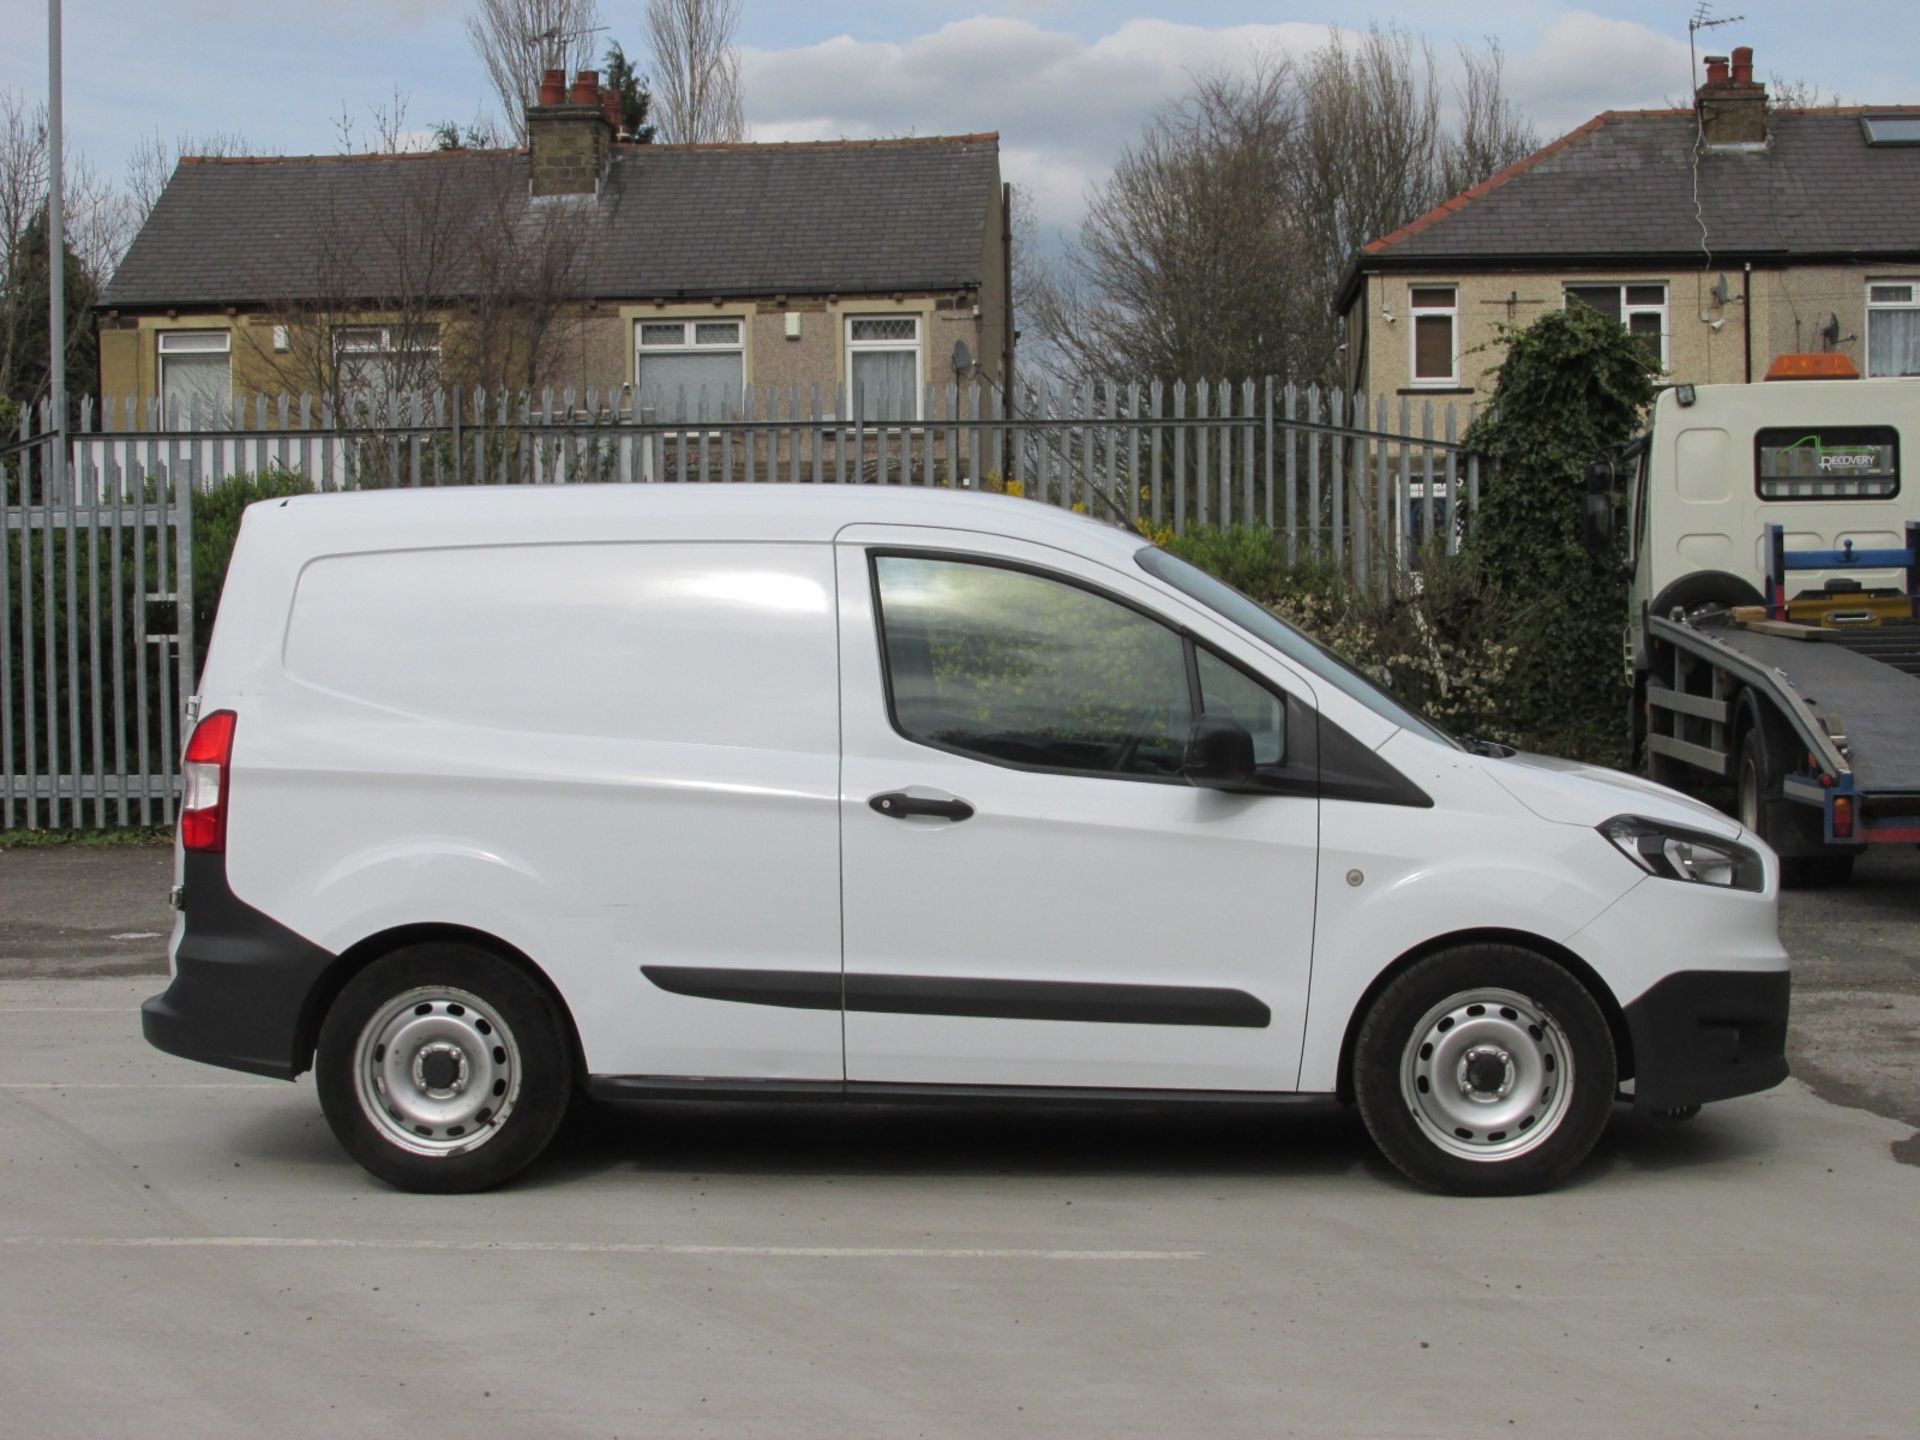 2015 Ford Transit Courier 1.5 TDCi Panel Van - 1 PLC Owner from New - FSH - Long MOT - Image 3 of 10